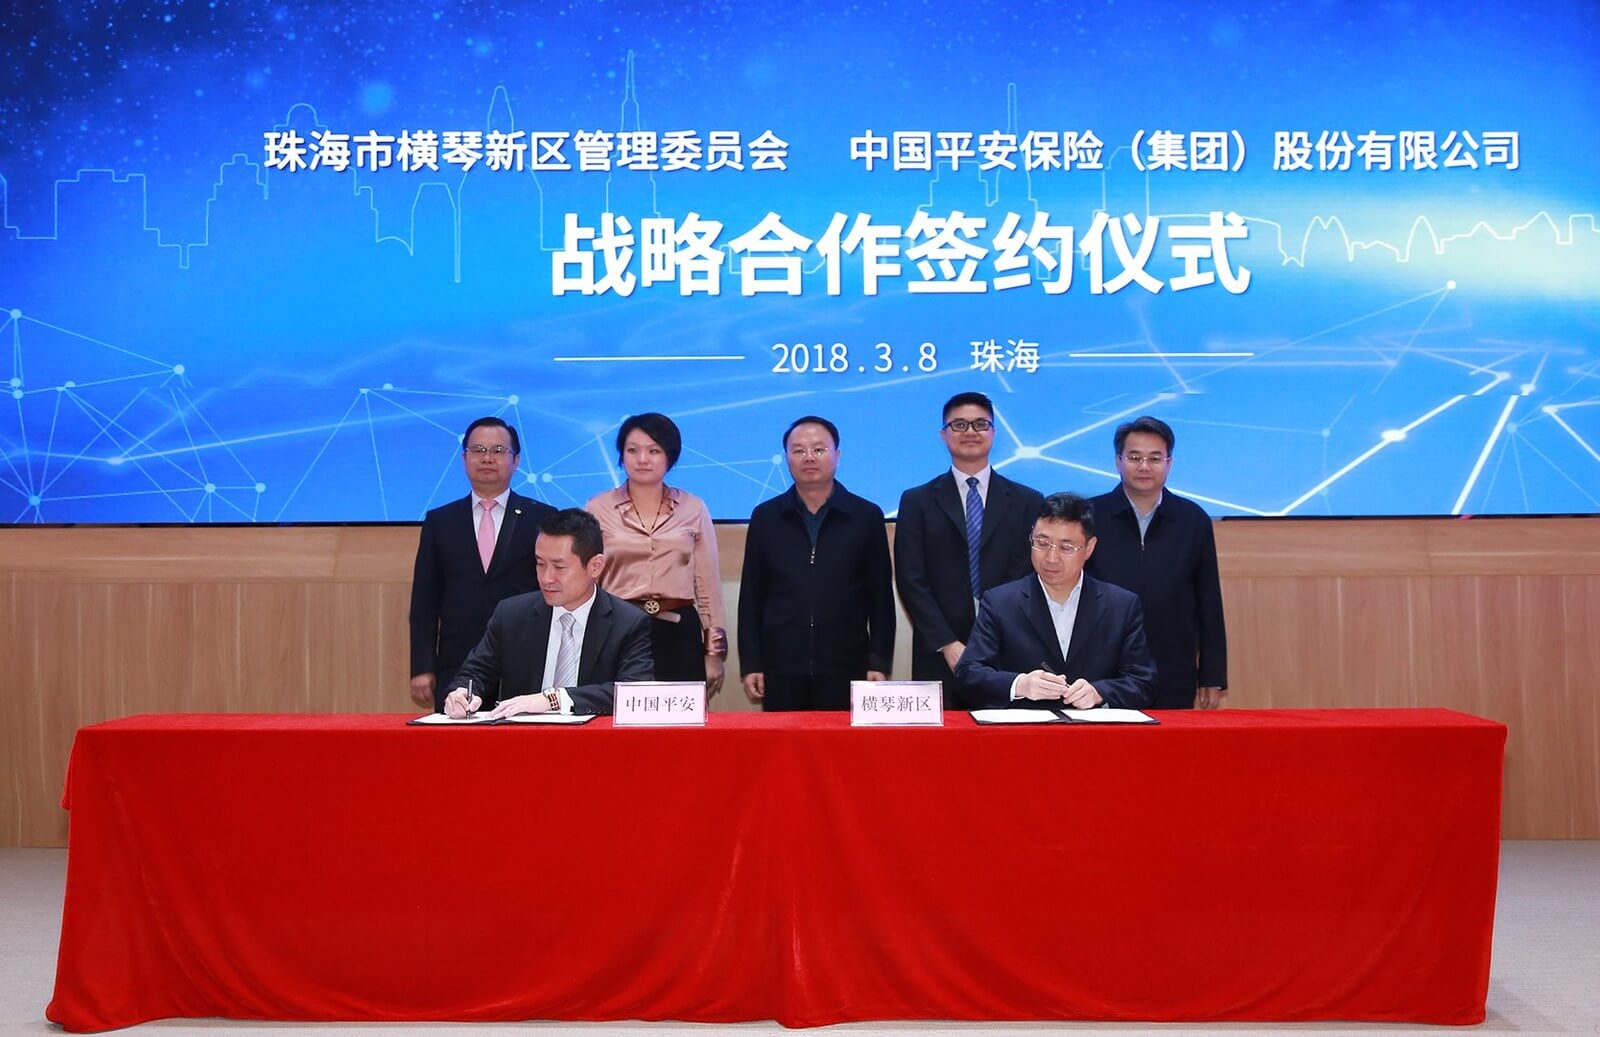 Ericson Chan, CEO of Ping An Technology, inked the agreement with the representative of Hengqin New District.